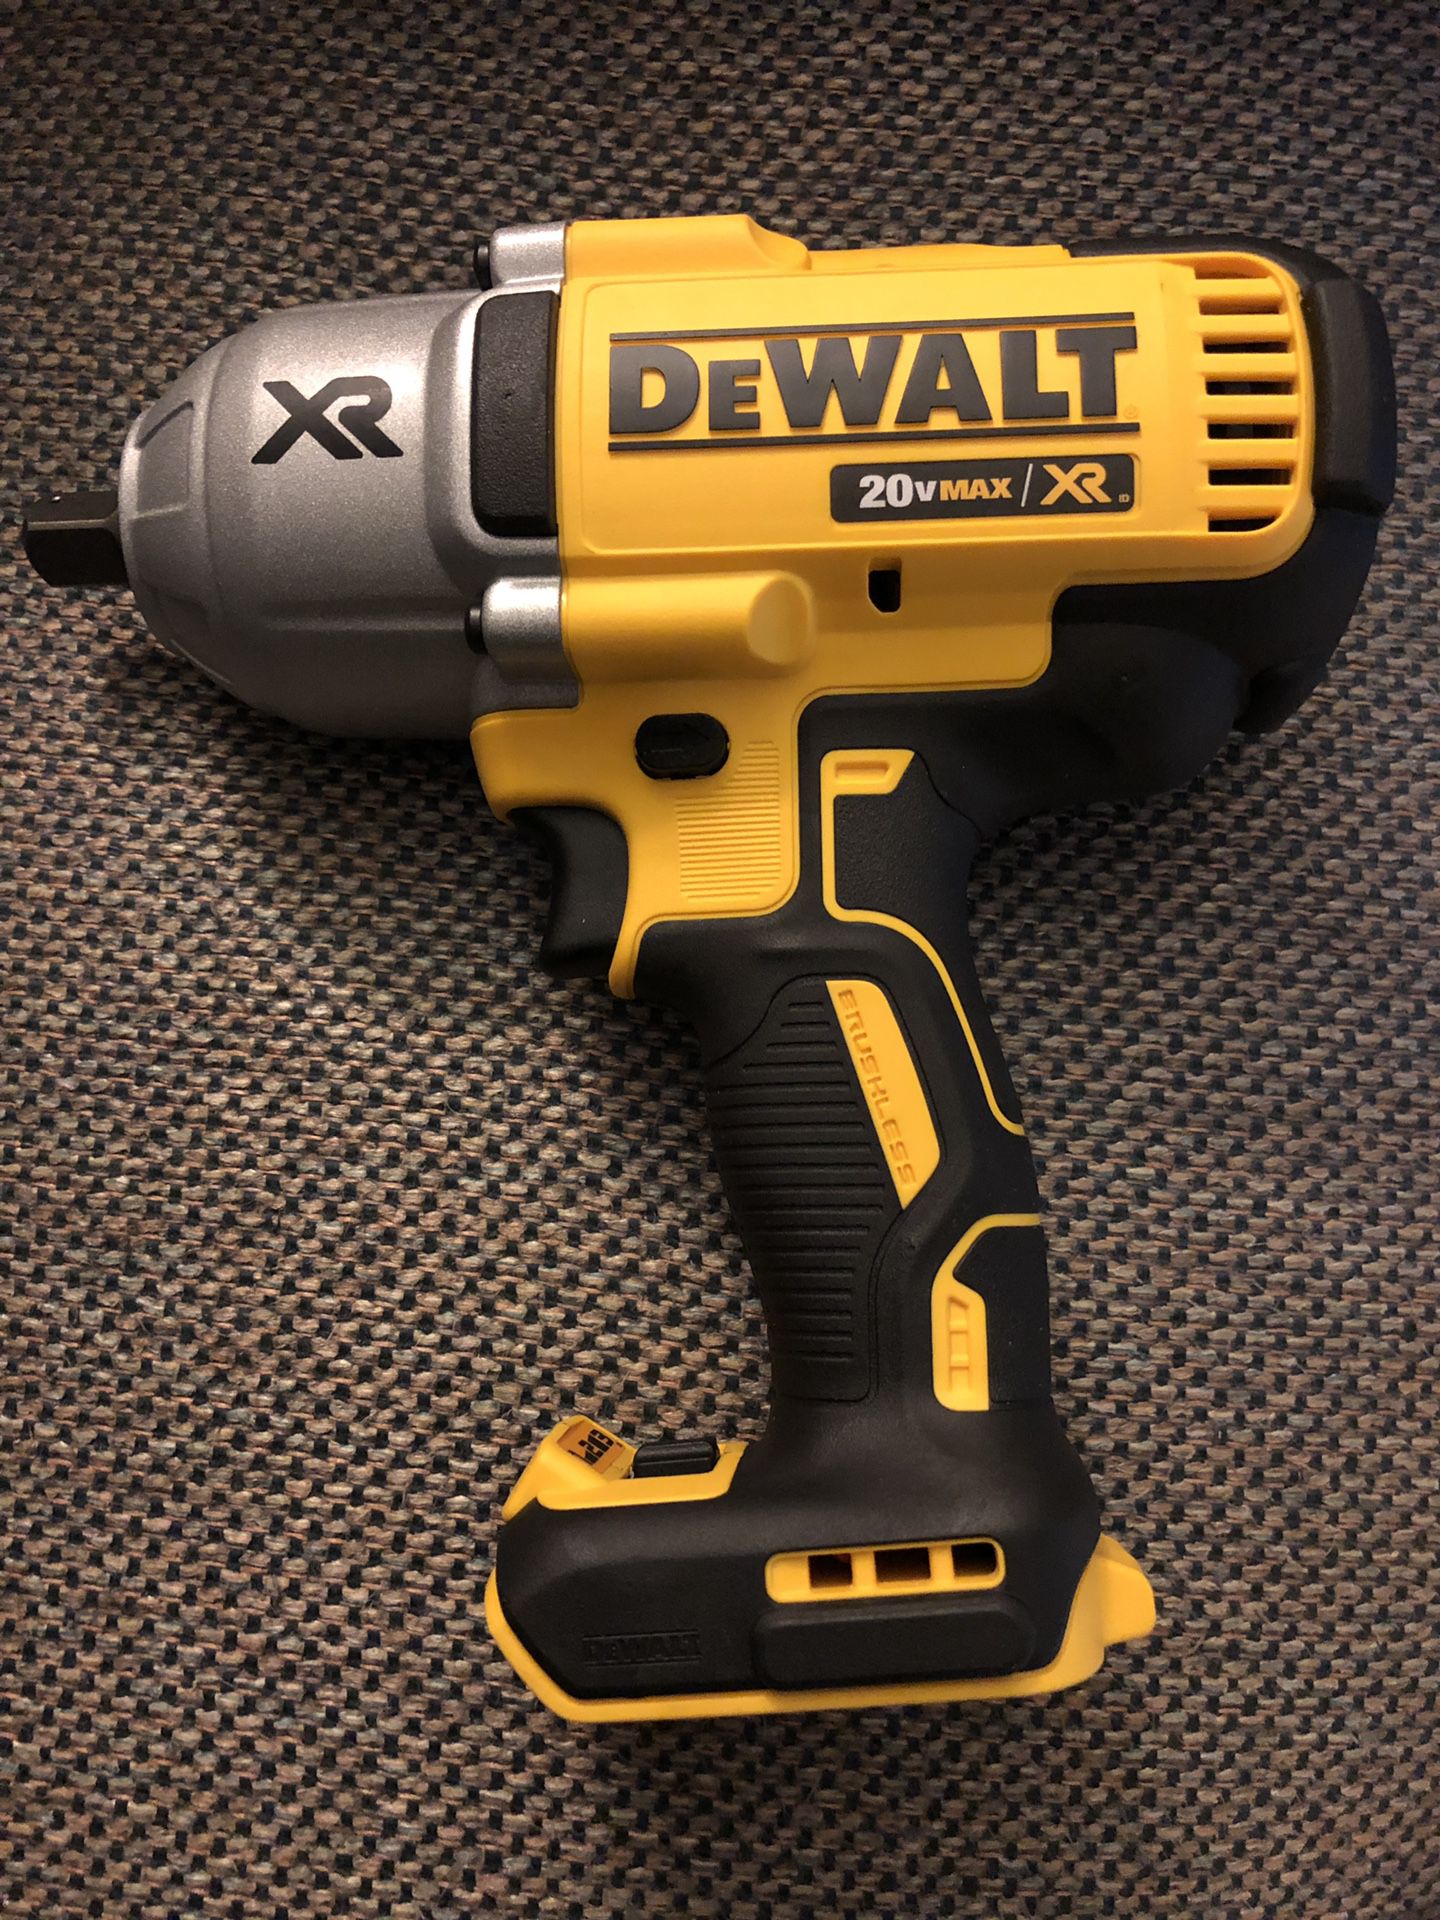 DEWALT 20-Volt Max XR Lithium-Ion 1/2 in. Cordless Impact Wrench Kit with Detent Pin Anvil (Tool-Only)